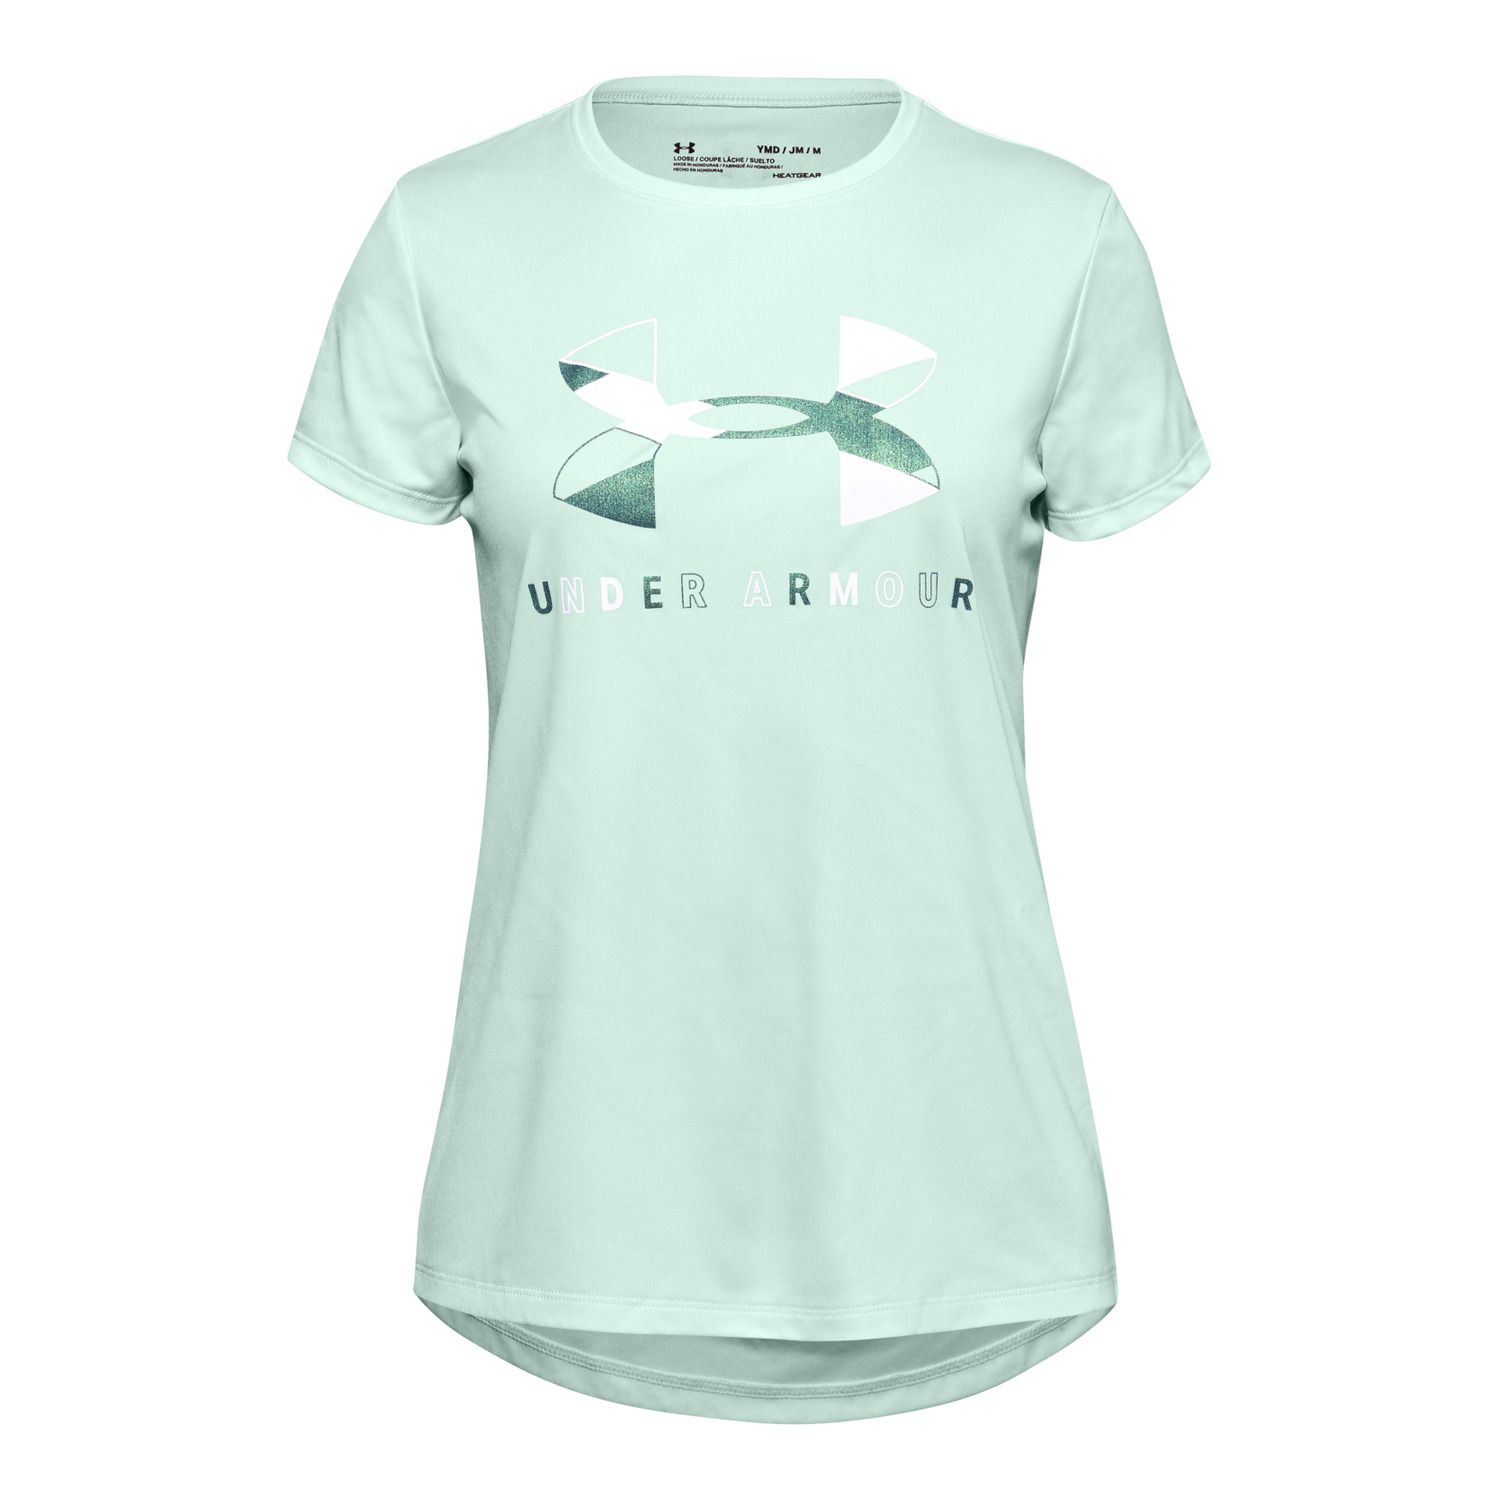 Girls Under Armour Kids Tops, Clothing 